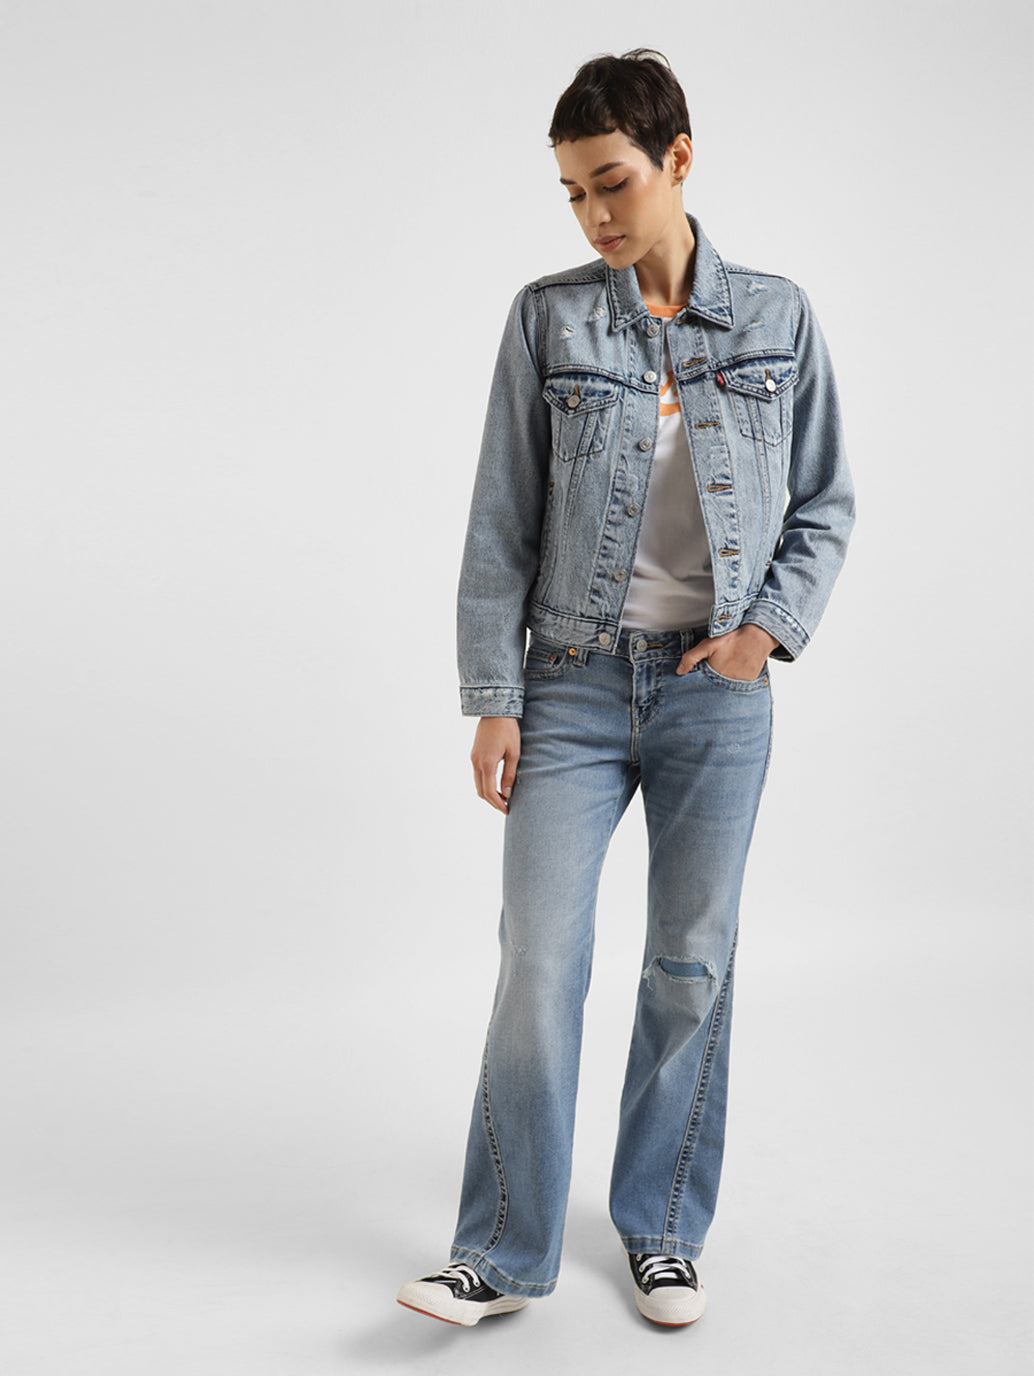 Buy Trendy Bootcut Jeans for Women Online – Levis India Store